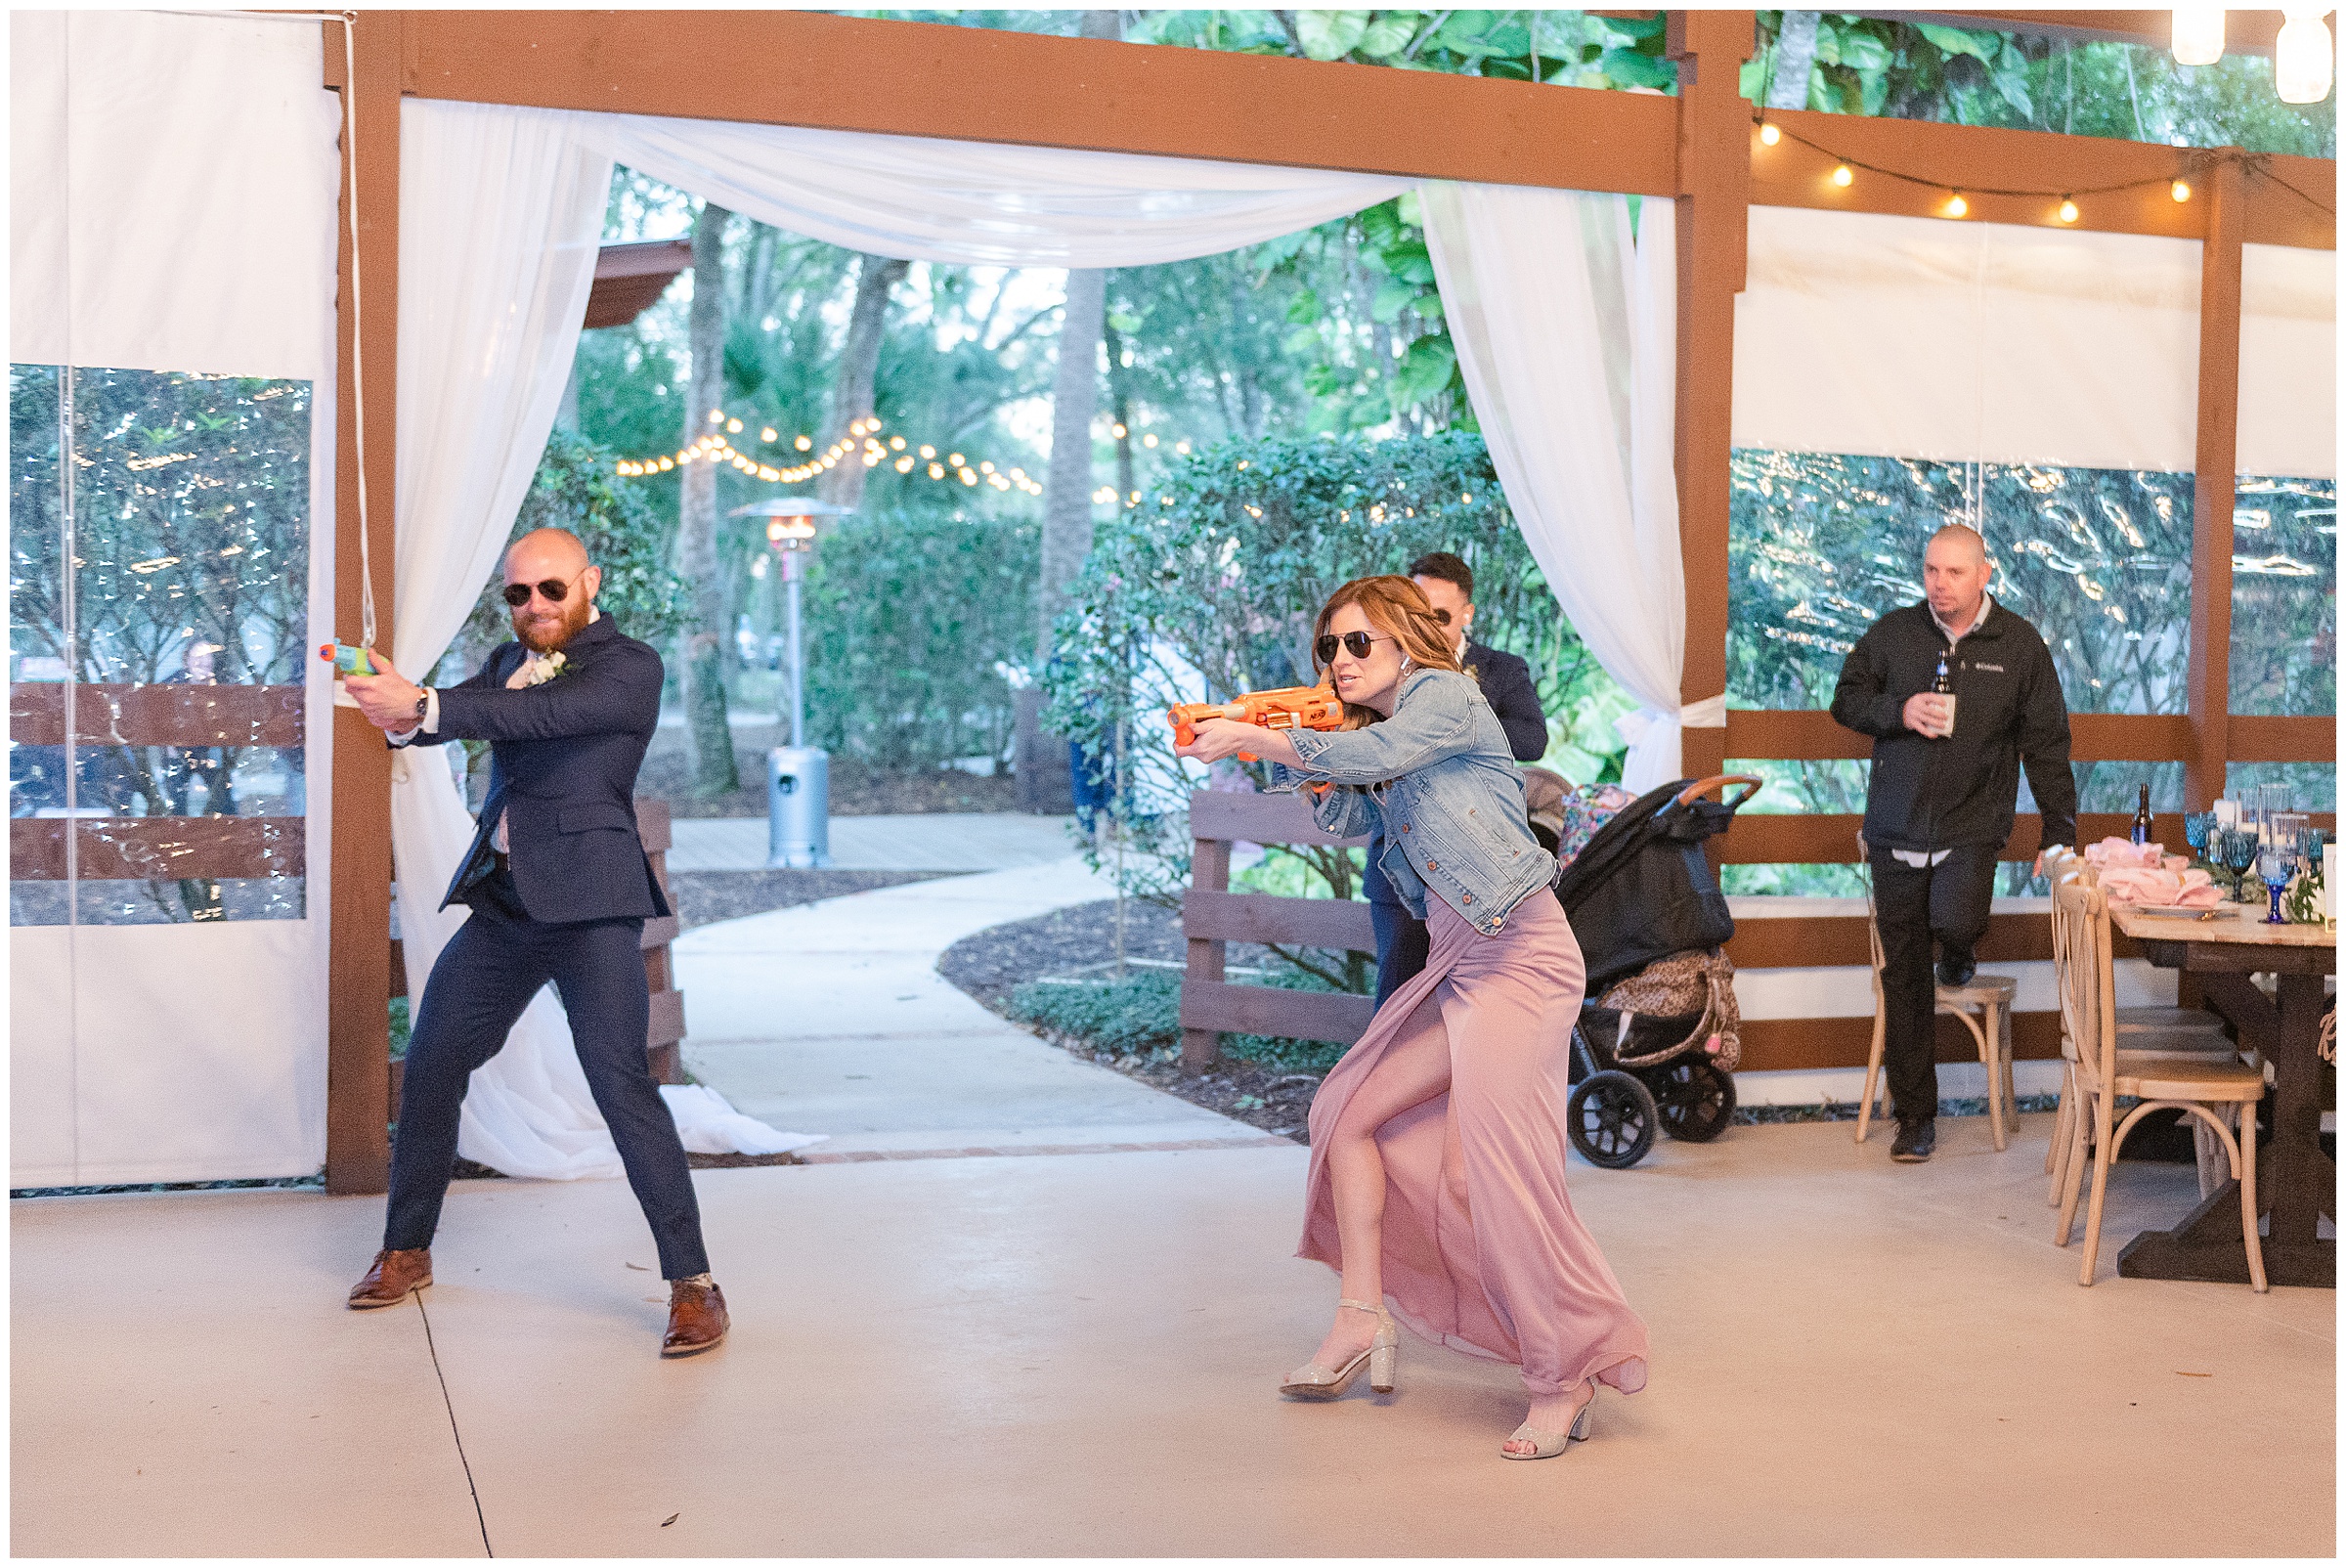 Fun bridal party reception entrance with nerf guns and sunglasses